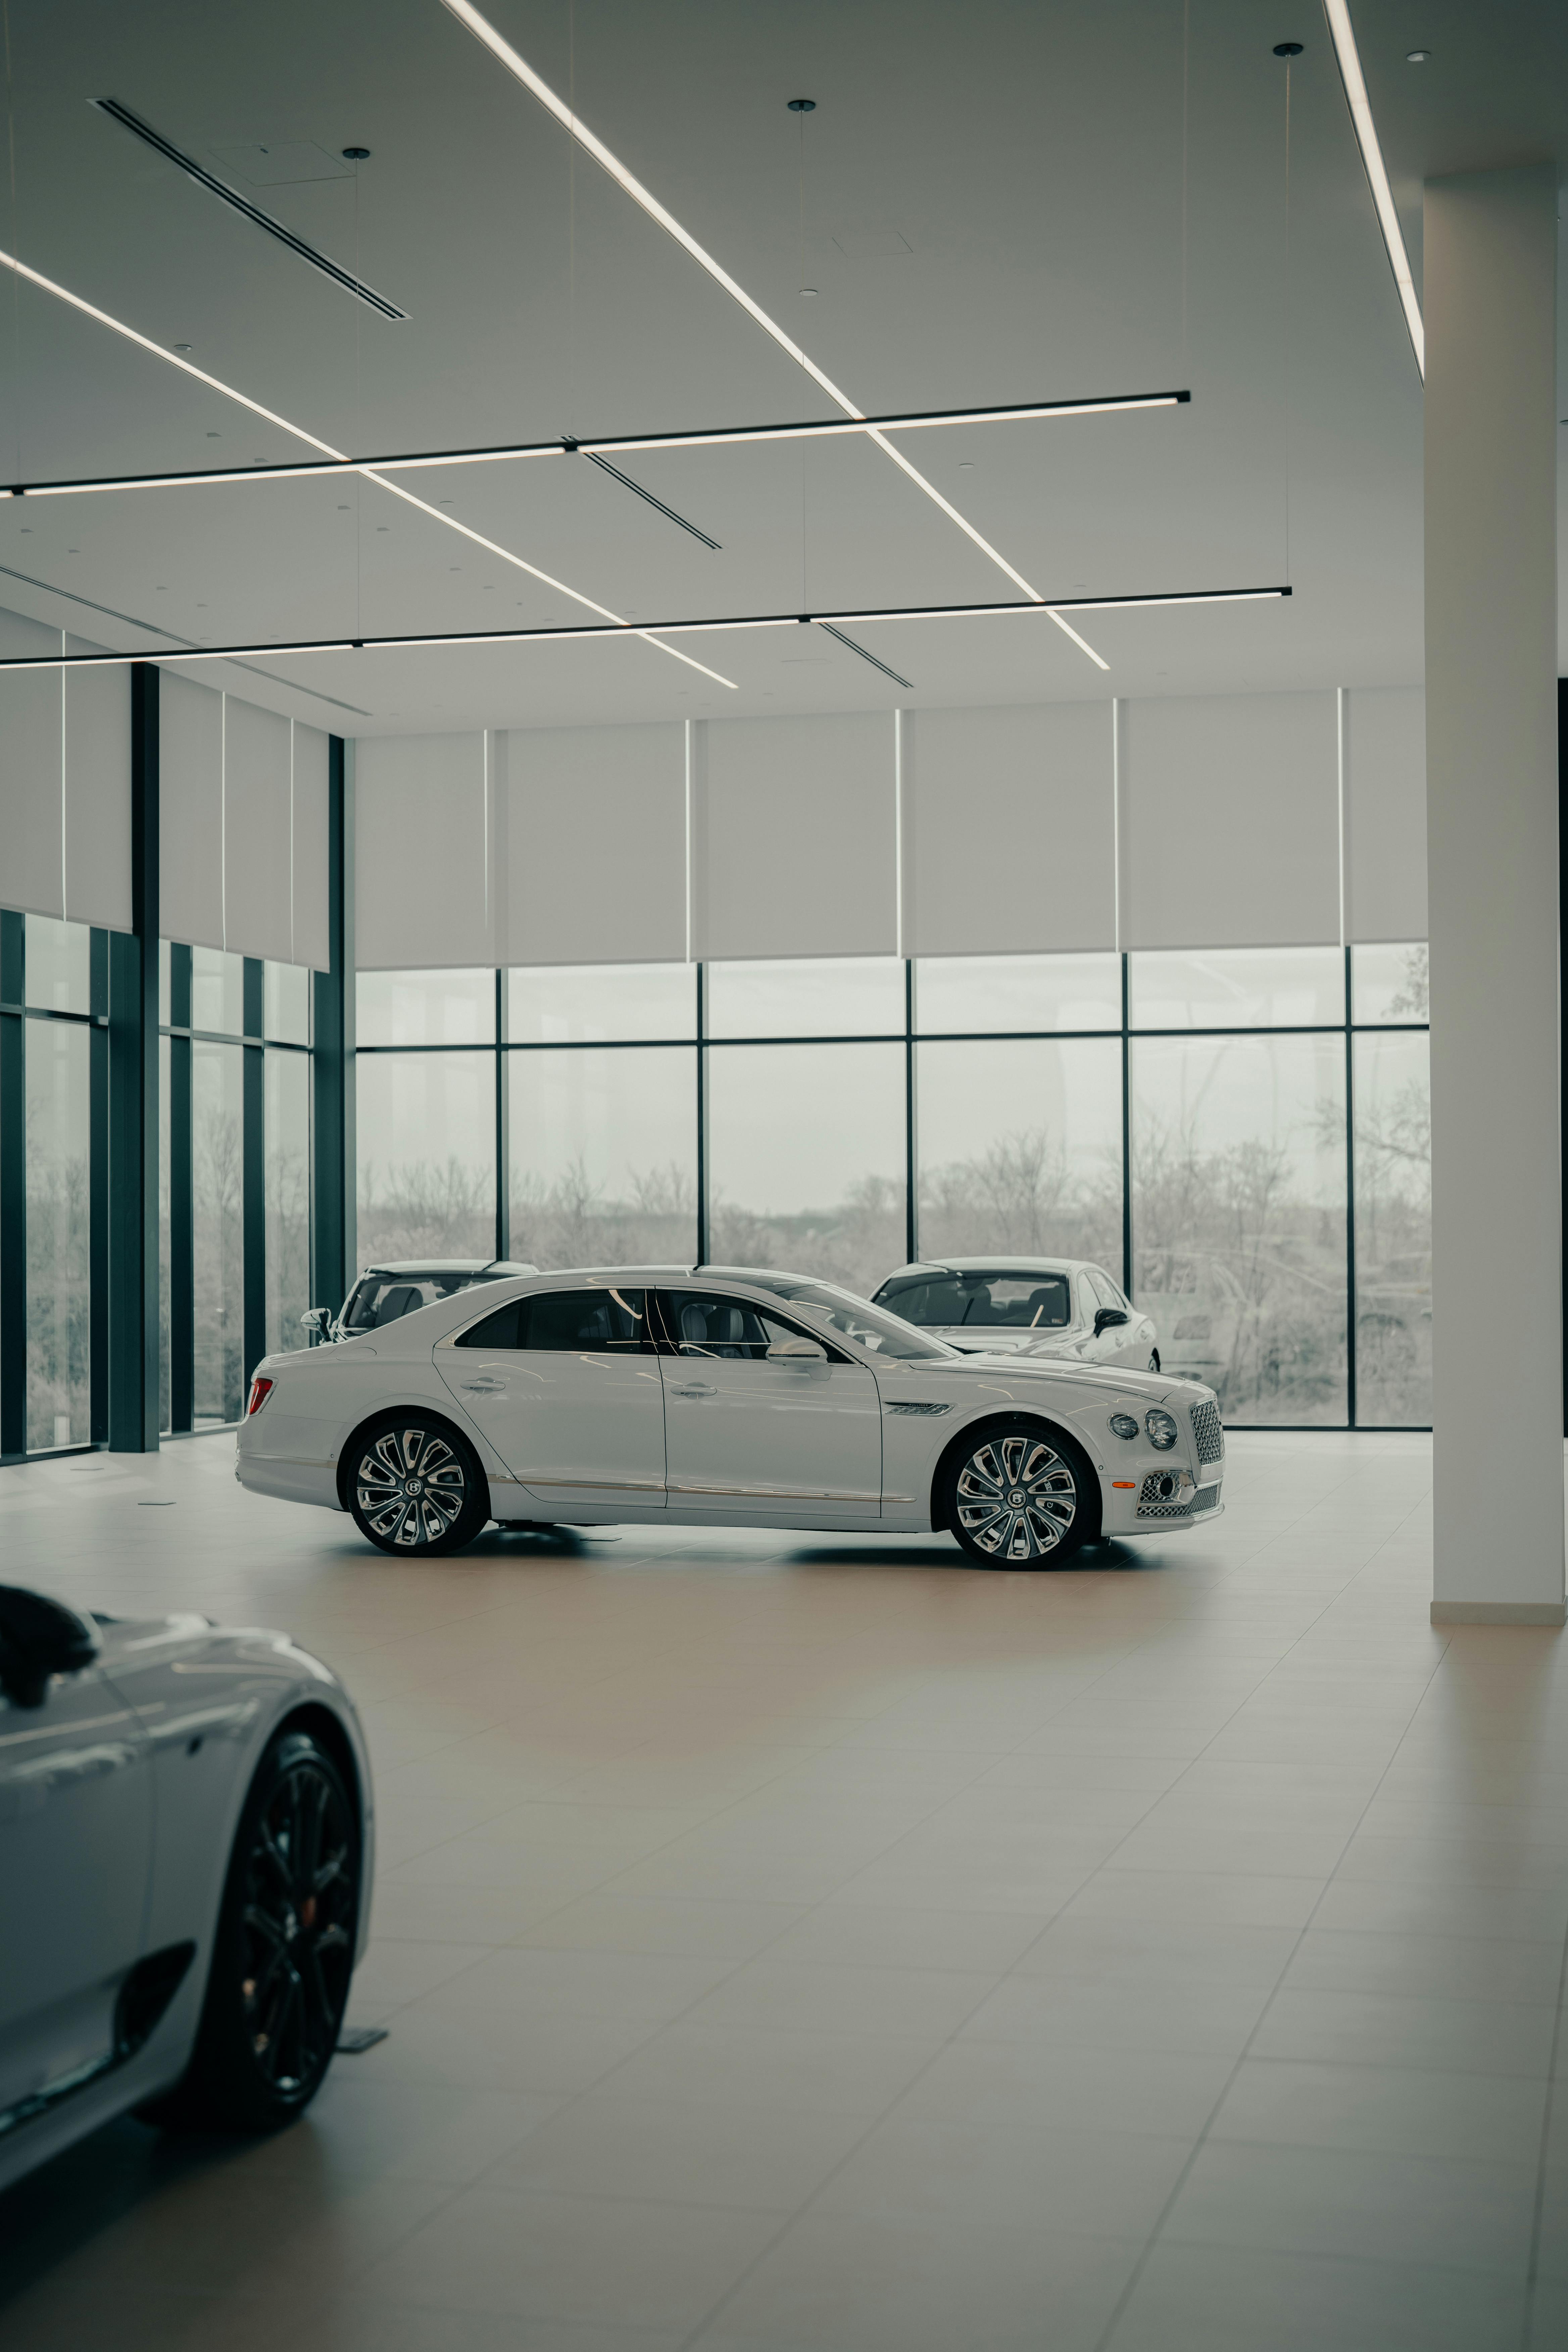 A white car on display in a showroom | Source: Pexels